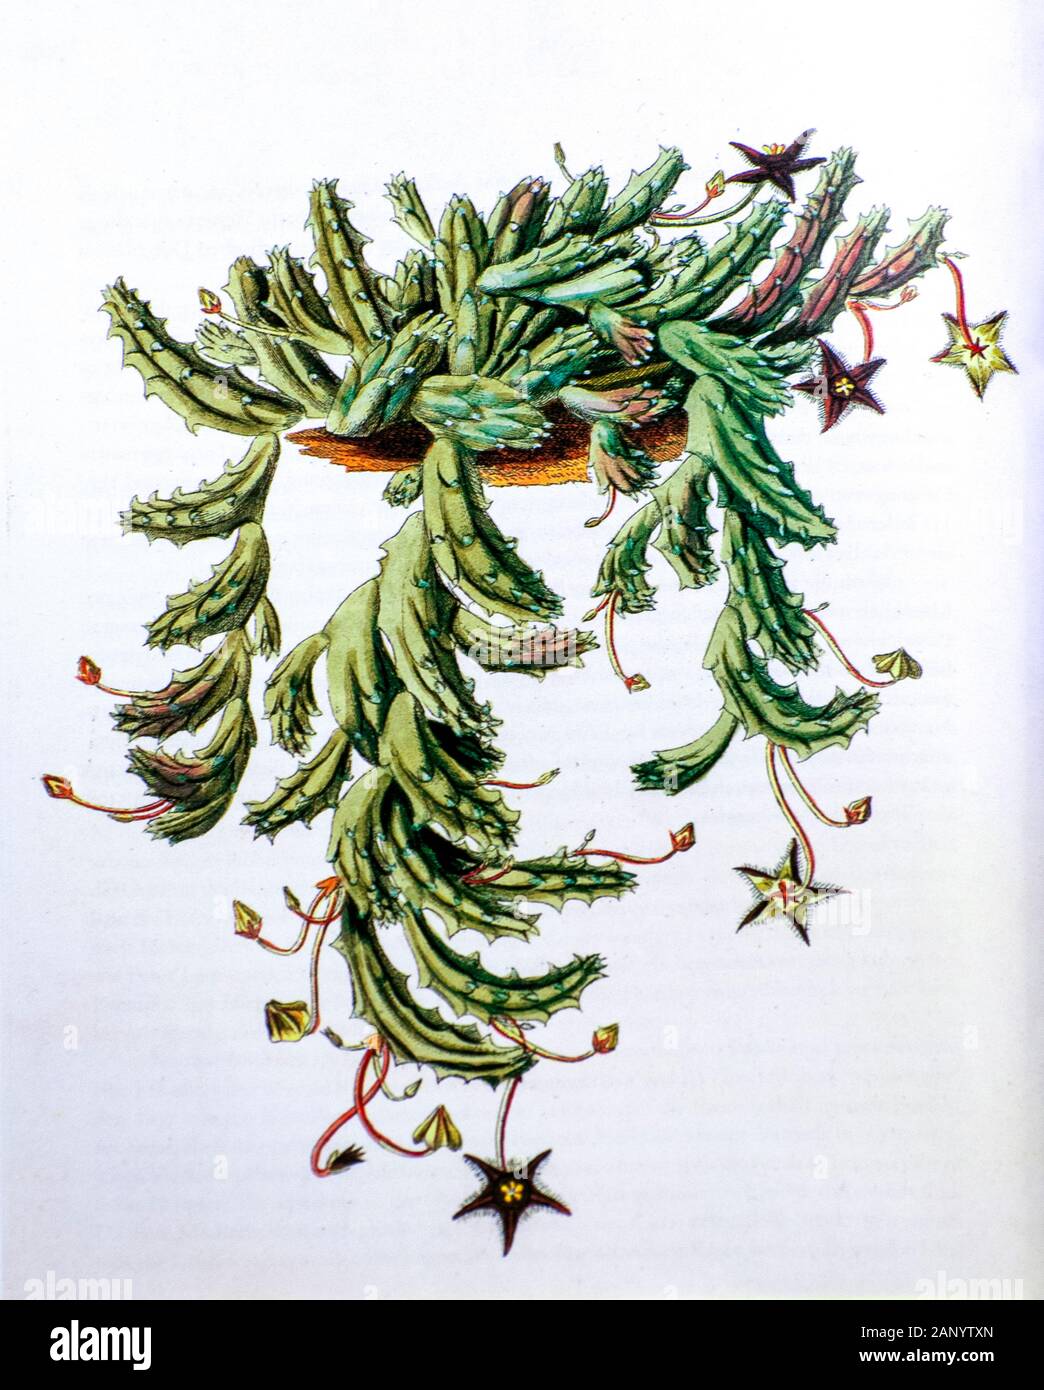 Stapelia hirsuta, Botanical illustration from c 1810 The common names are starfish flower or carrion plant Stock Photo